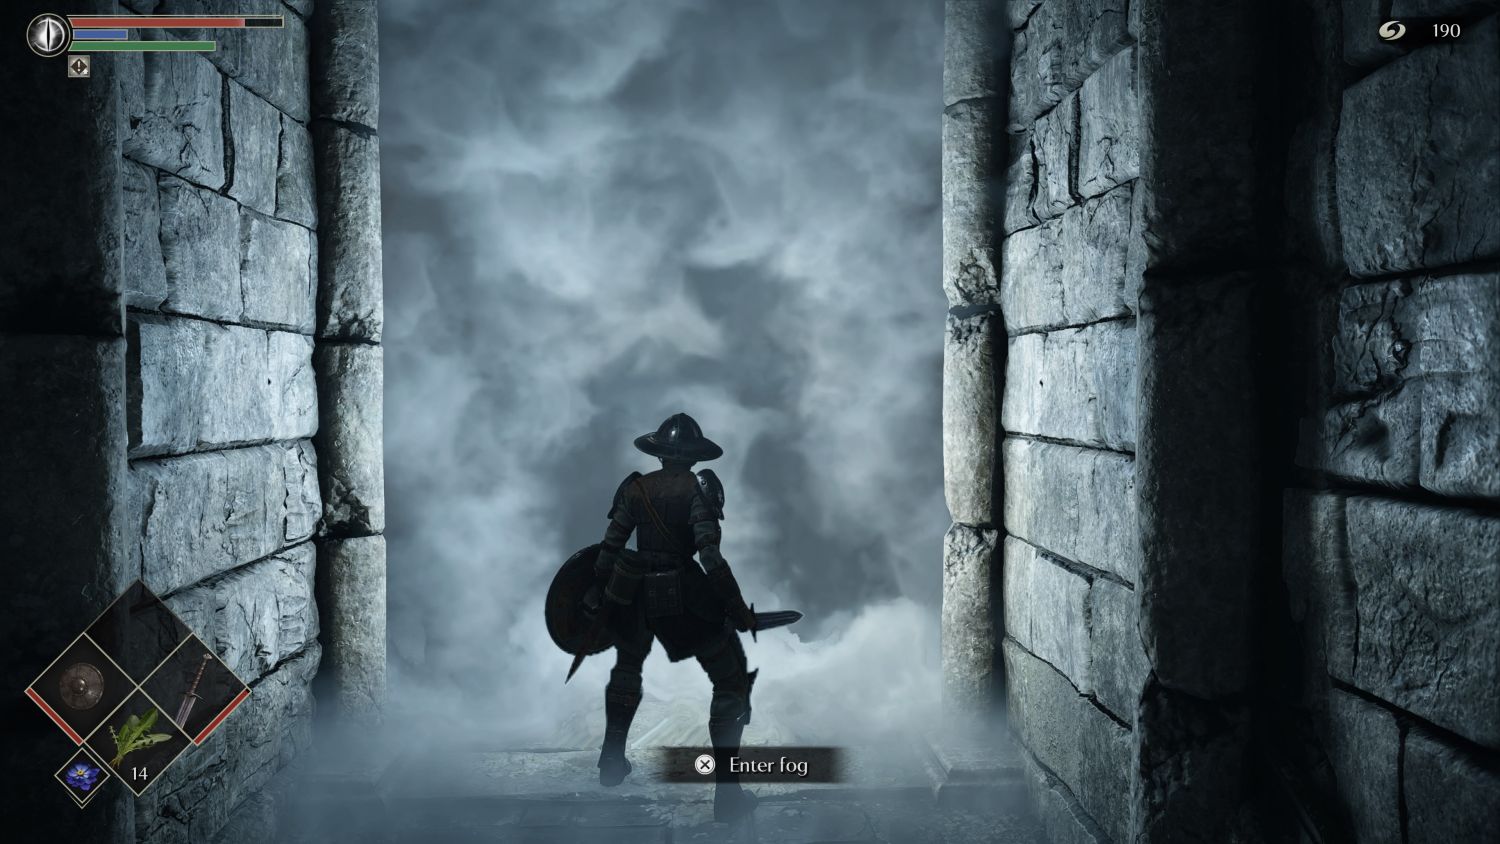 Looking for the old Souls within Bluepoint's Demon's Souls remake